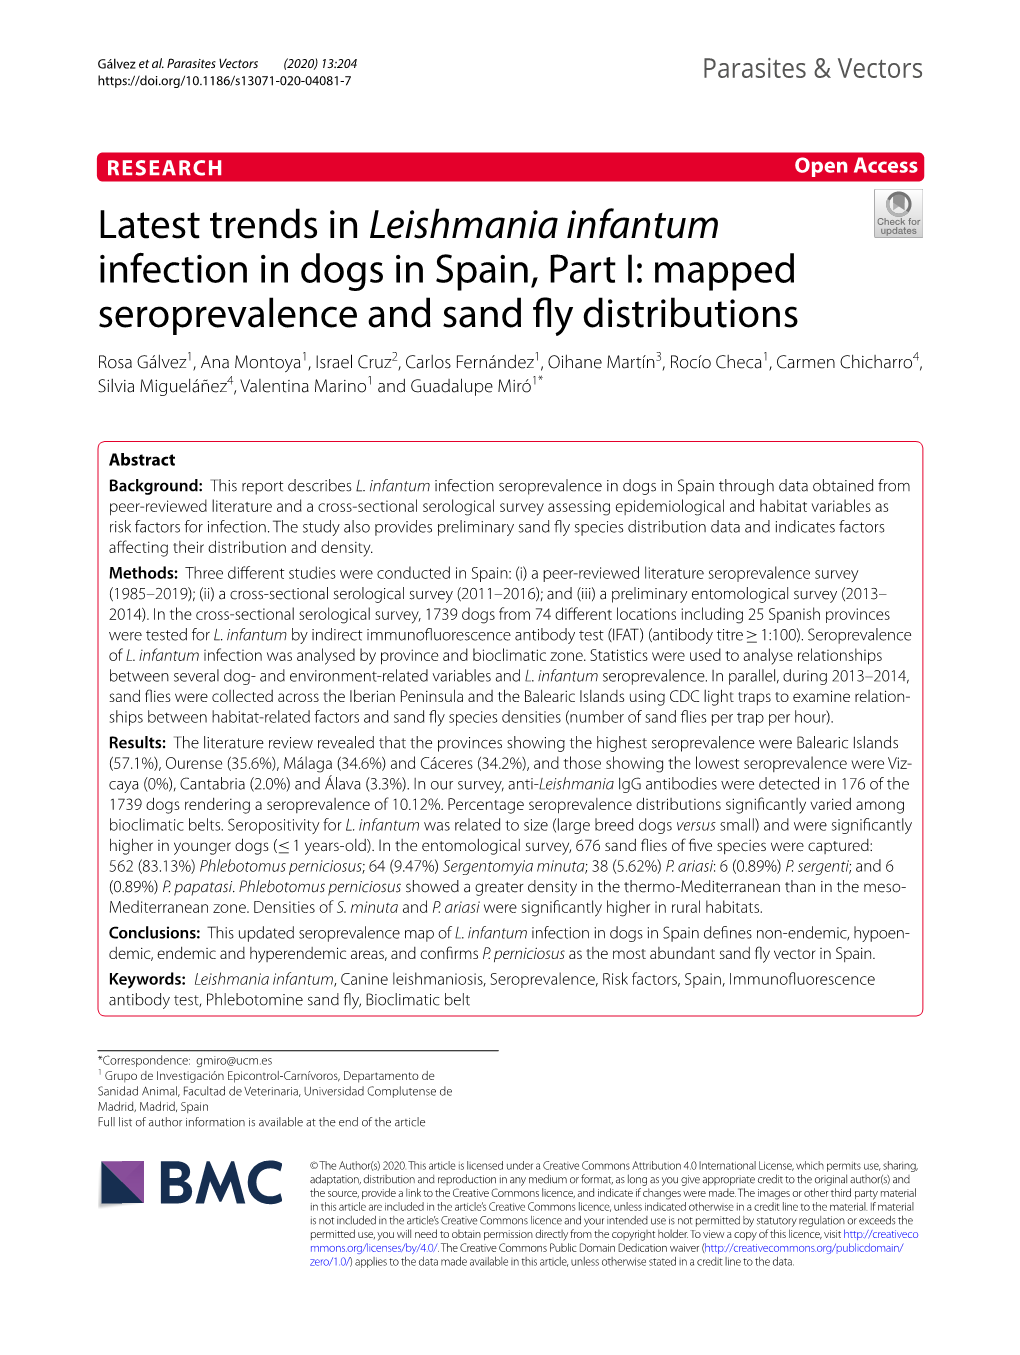 Latest Trends in Leishmania Infantum Infection in Dogs in Spain, Part I